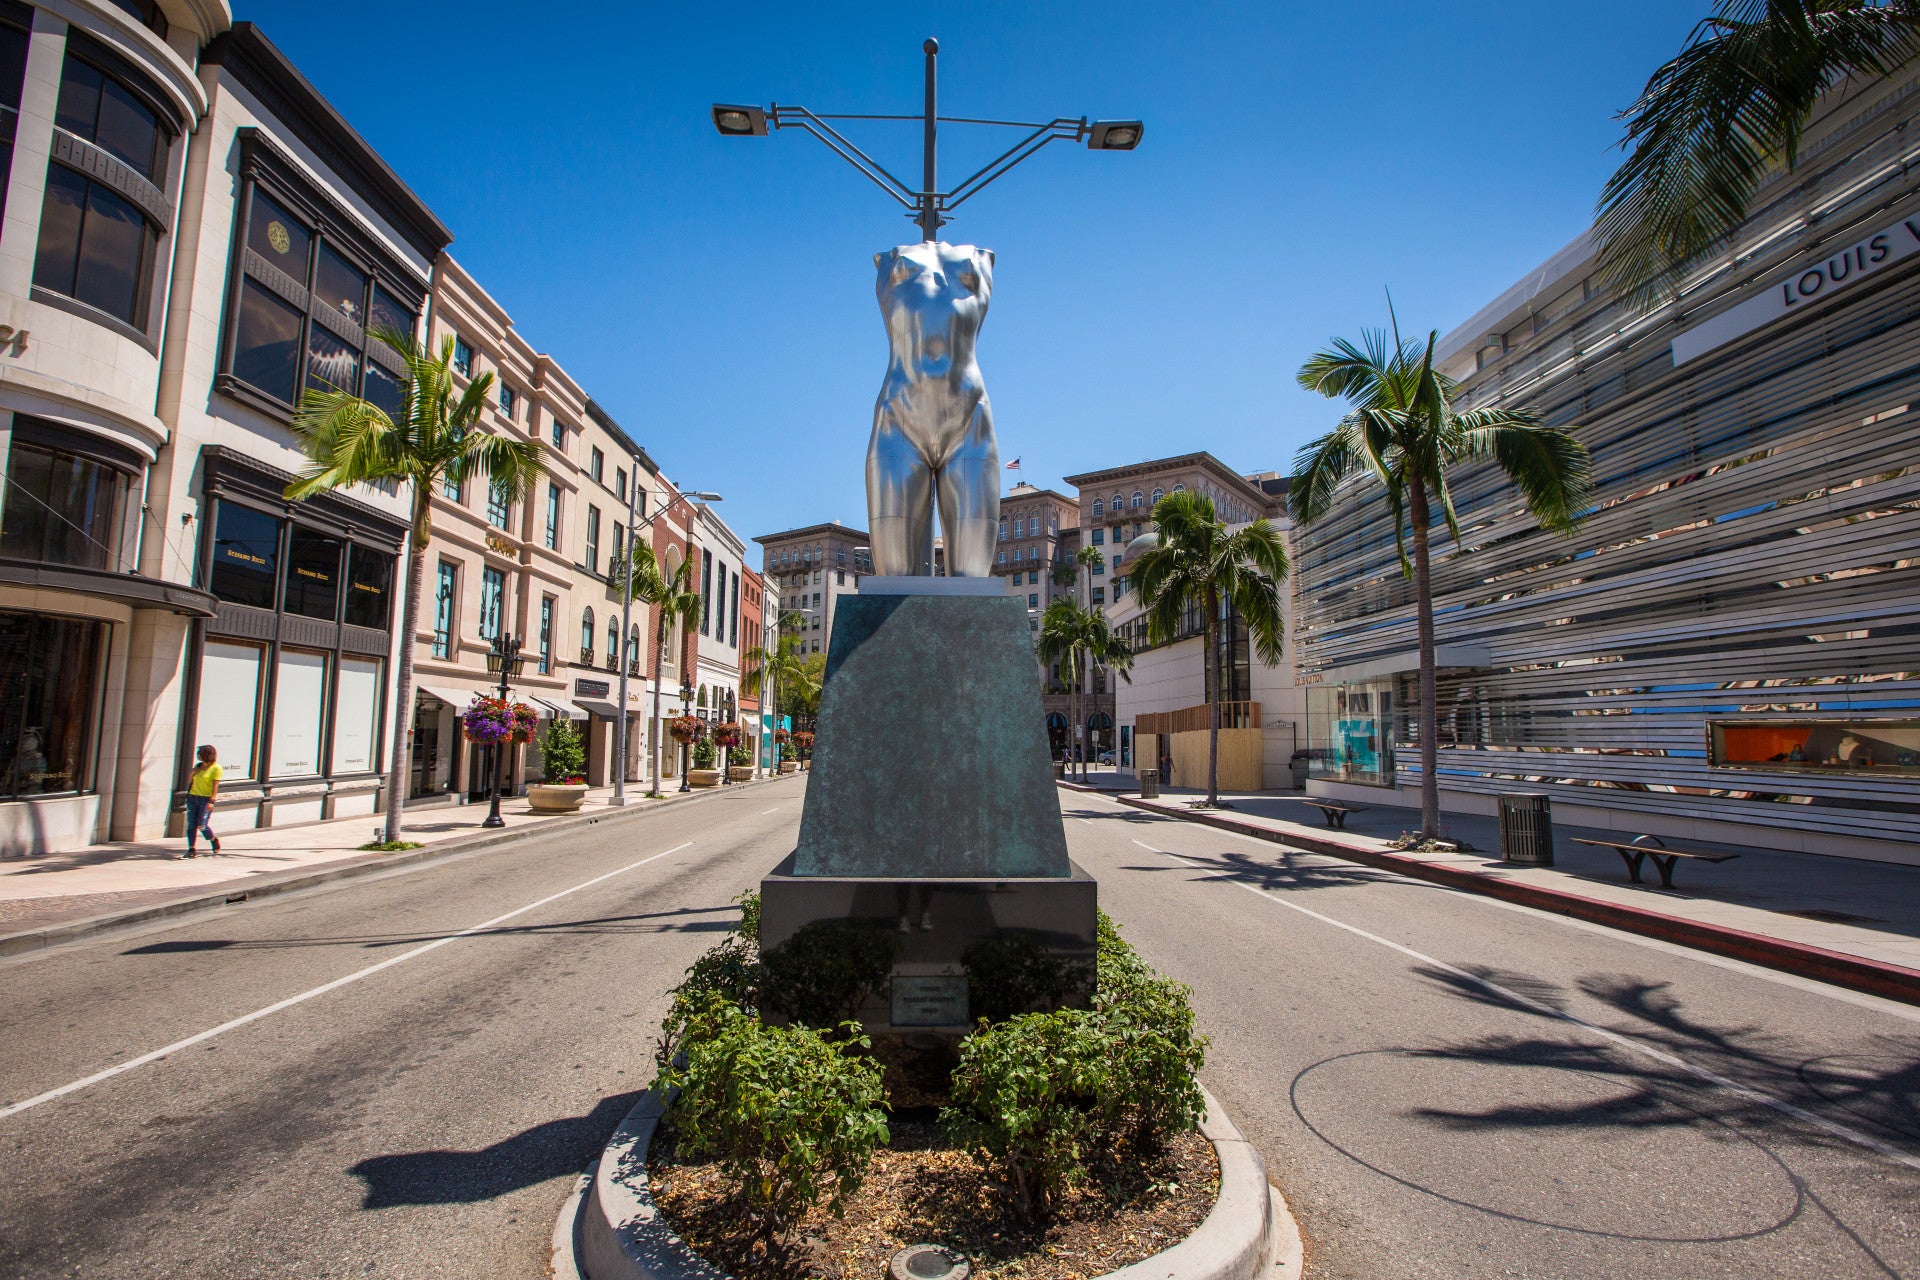 RODEO DRIVE - An epicenter of luxury, fashion and lifestyle